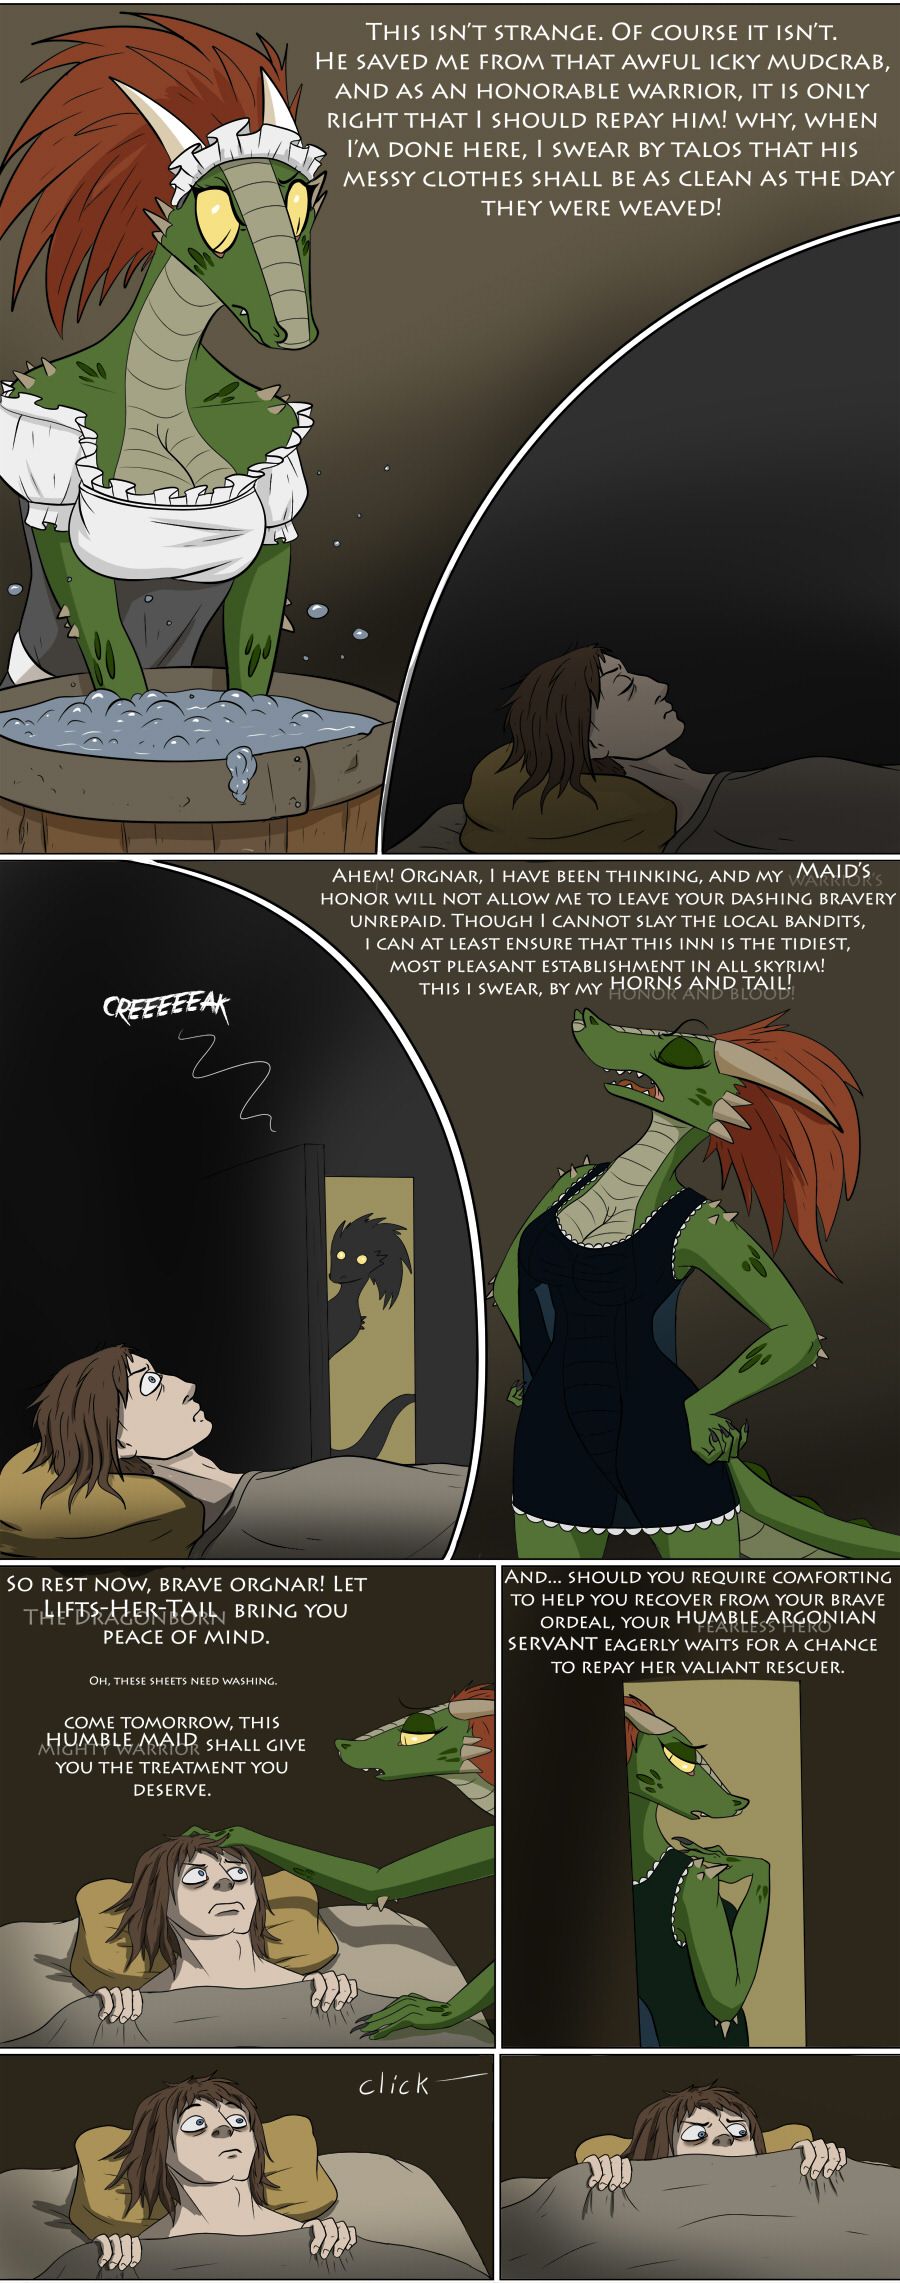 [Valsalia] Lusty Argonian Maid'd [Ongoing] 6